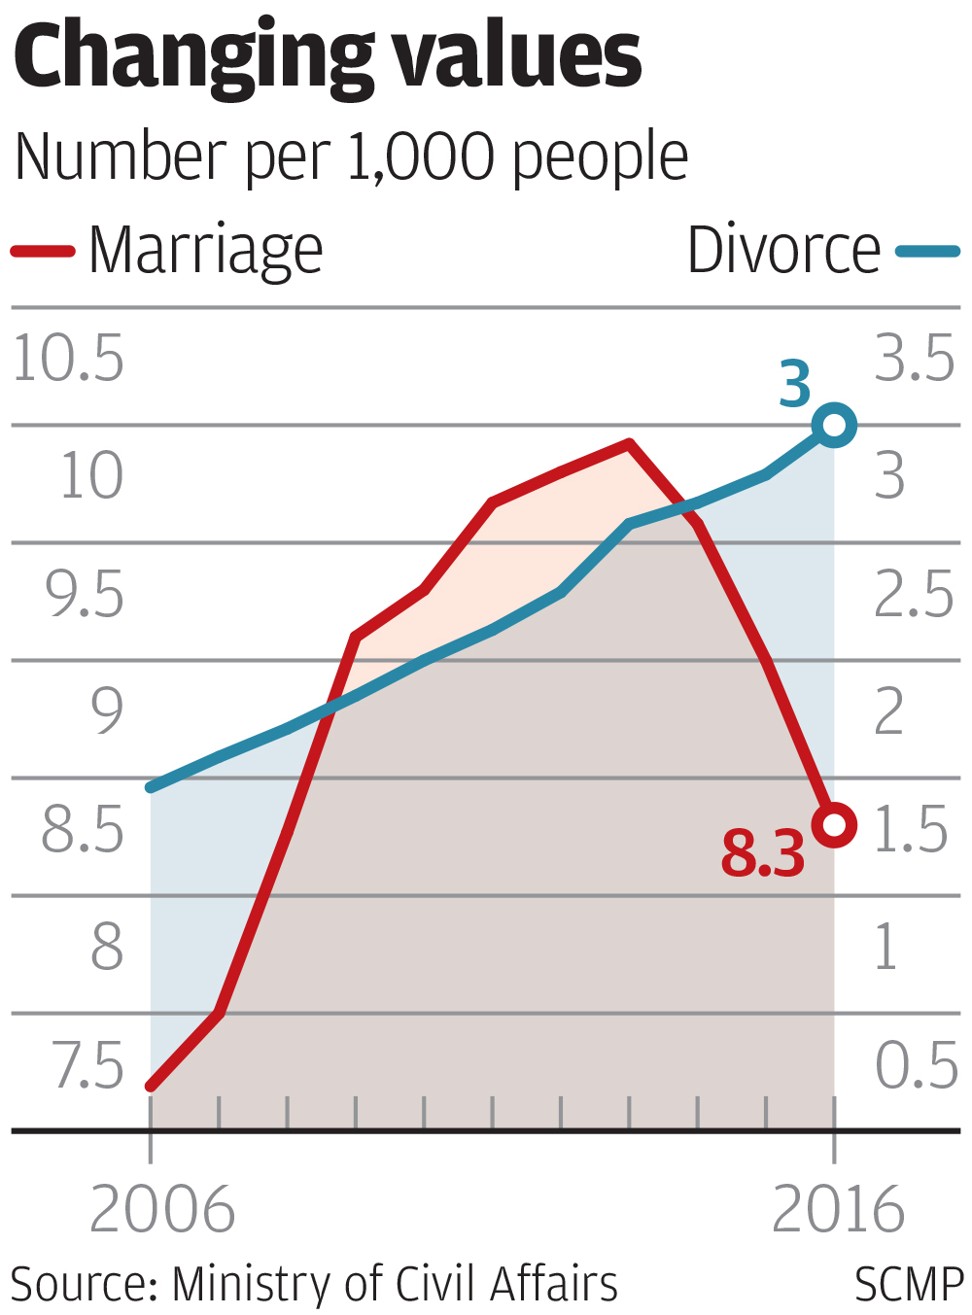 China’s President Xi Jinping said that happy families are the cornerstones of a harmonious society. Graphic: SCMP